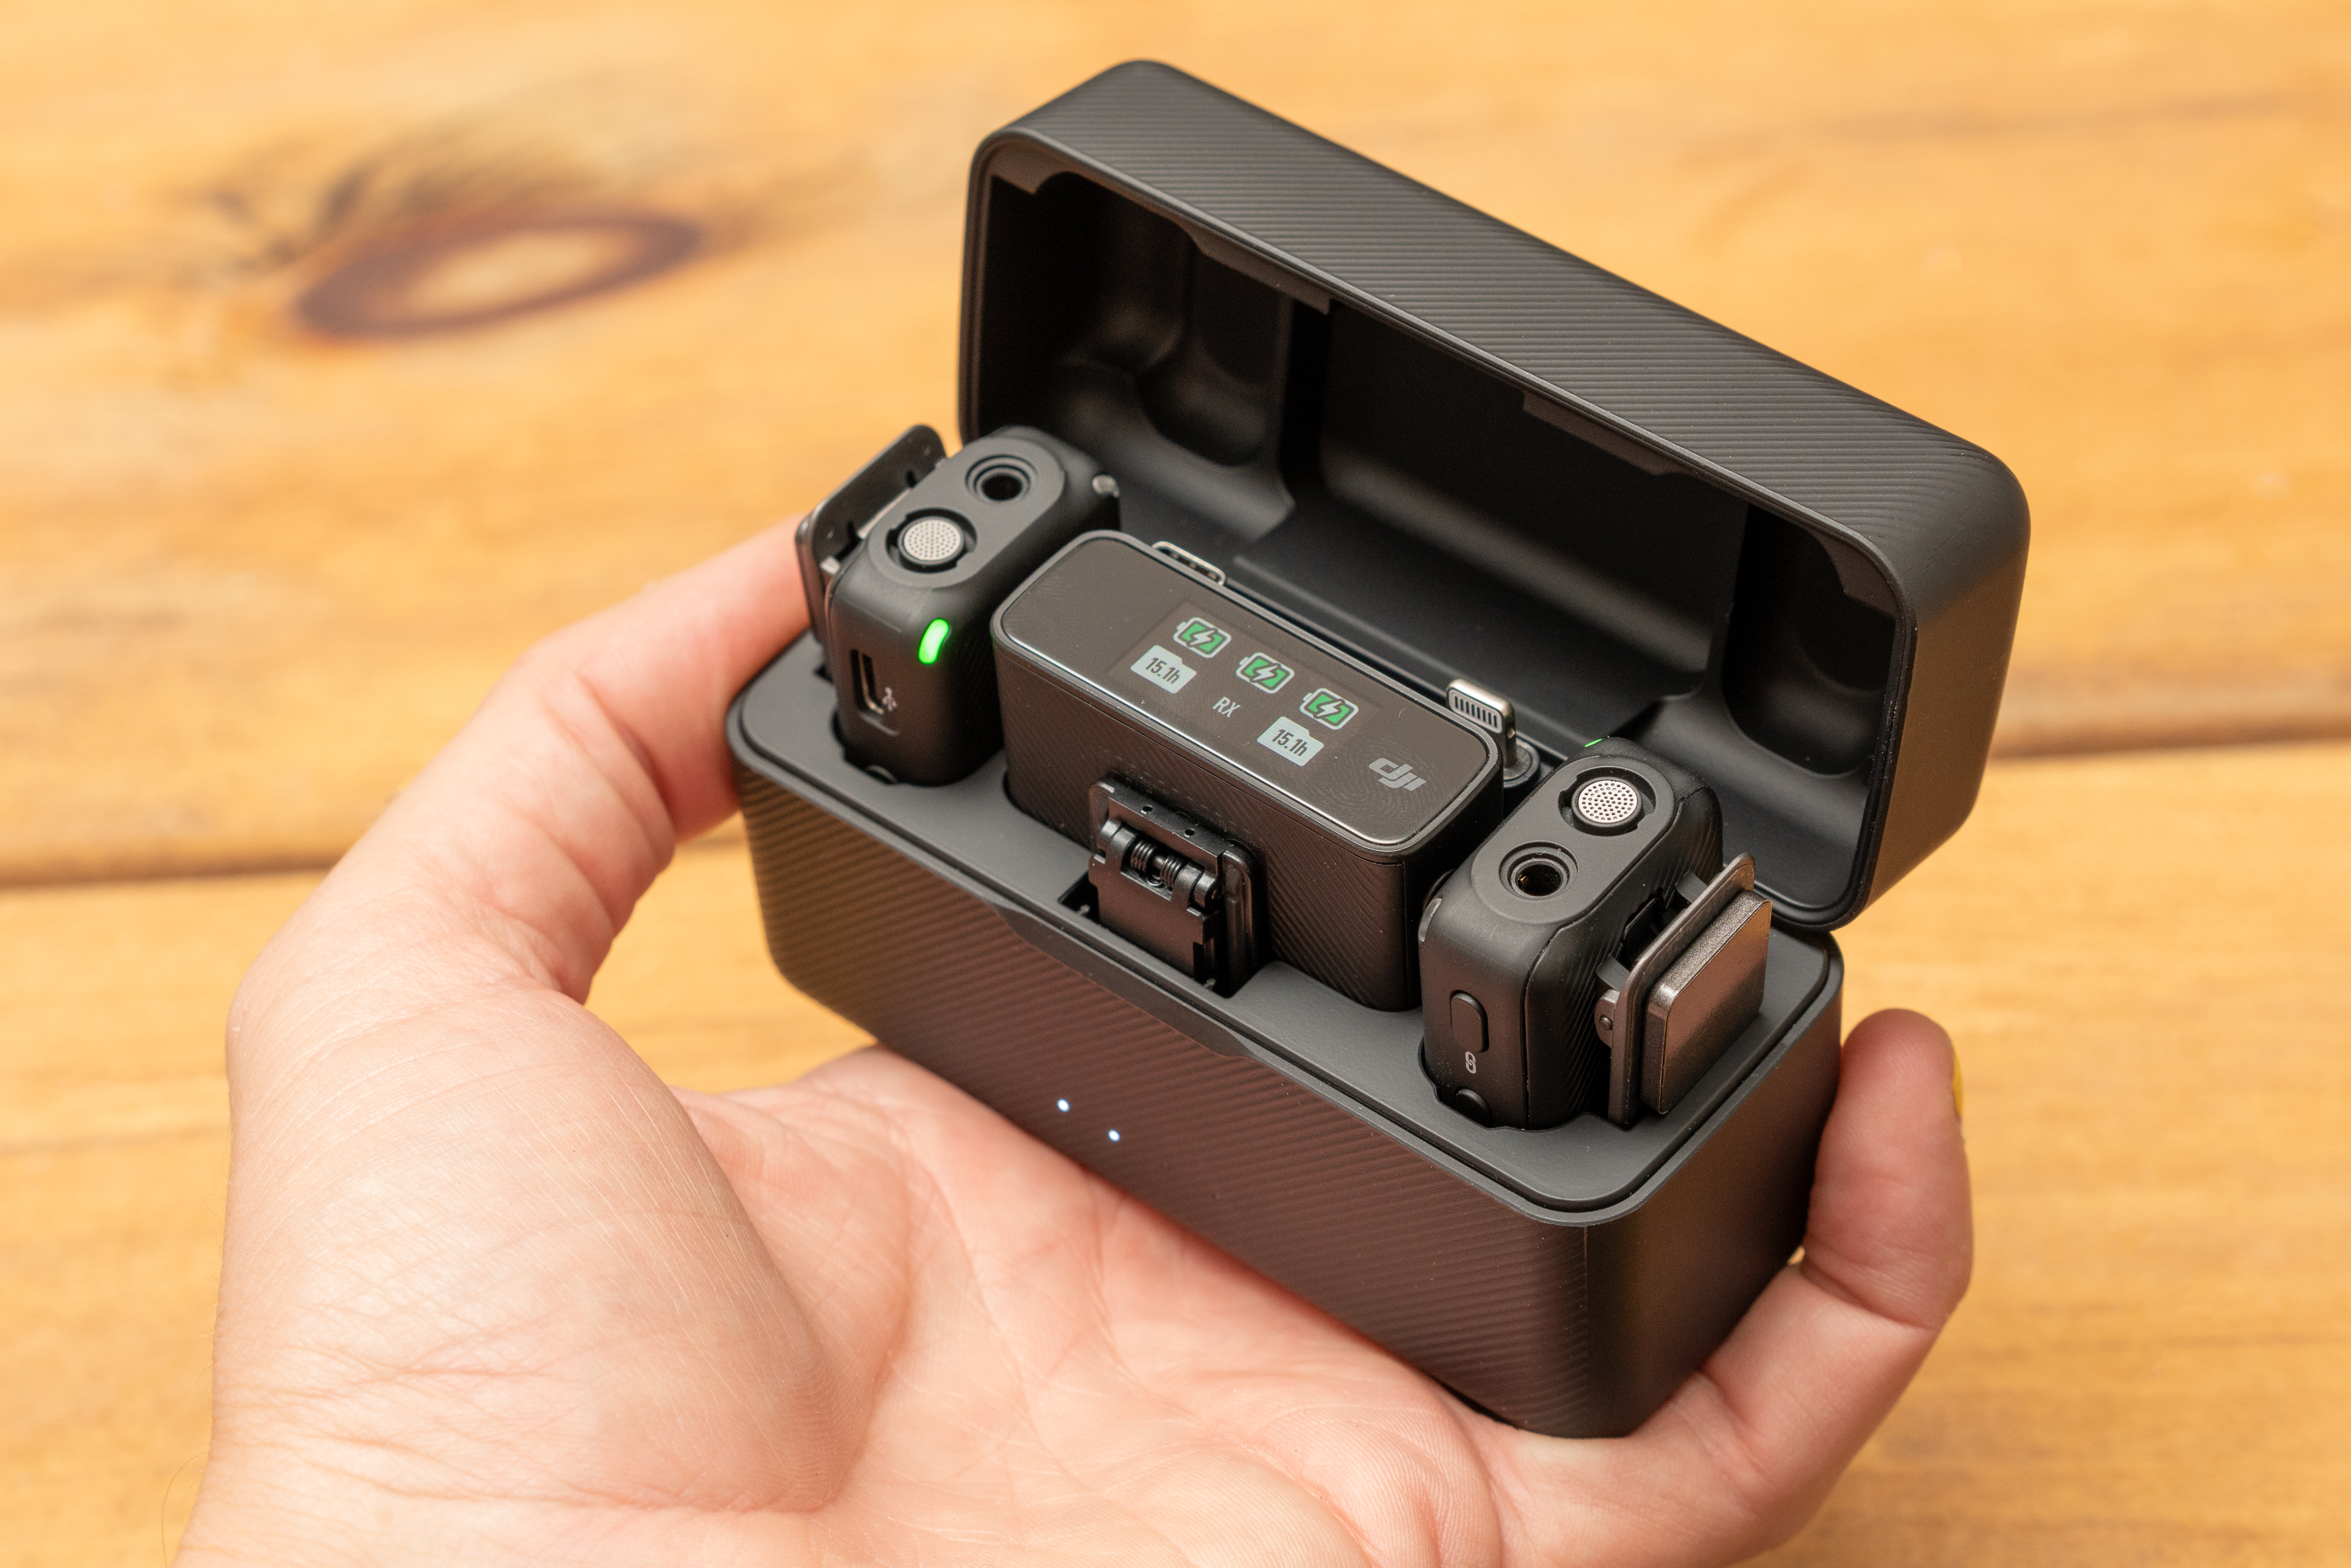 DJI MIc box, open with microphones and receivers showing, held in a hand for size